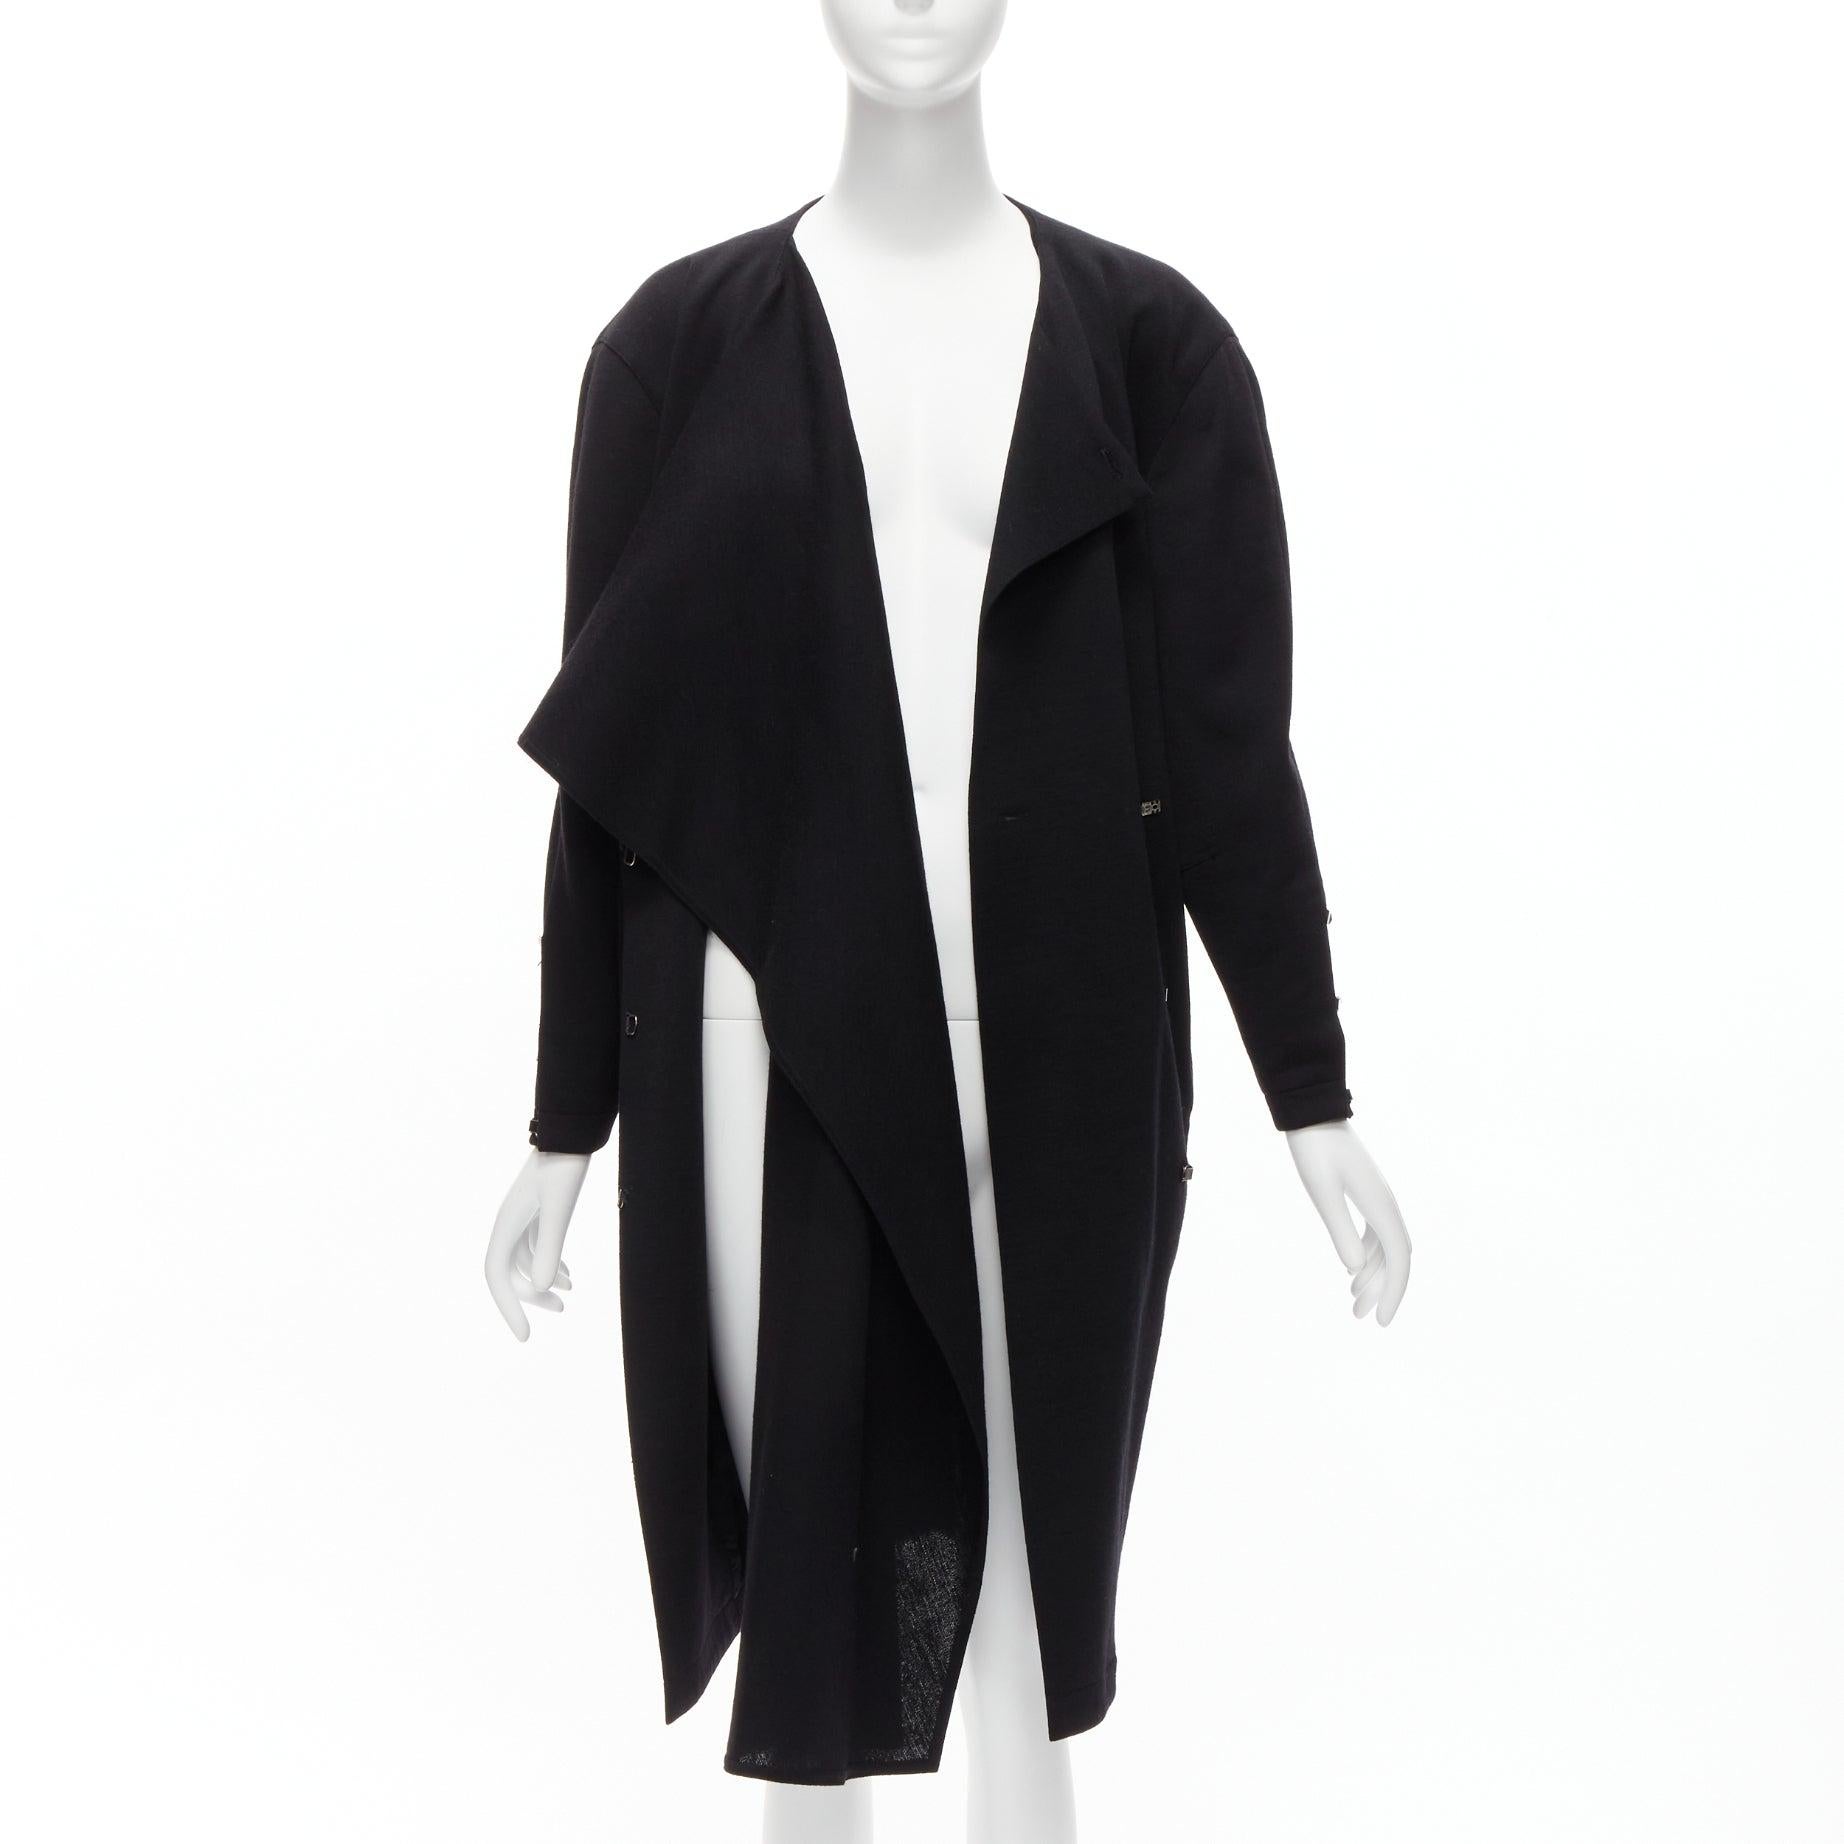 CLAUDE MONTANA 1980s Vintage black wool scarf collar toggle coat IT9A3 S
Reference: TGAS/D00405
Brand: Claude Montana
Collection: 1980's
Material: Wool
Color: Black
Pattern: Solid
Closure: Hook & Bar
Lining: Black Fabric
Extra Details: Big shoulder